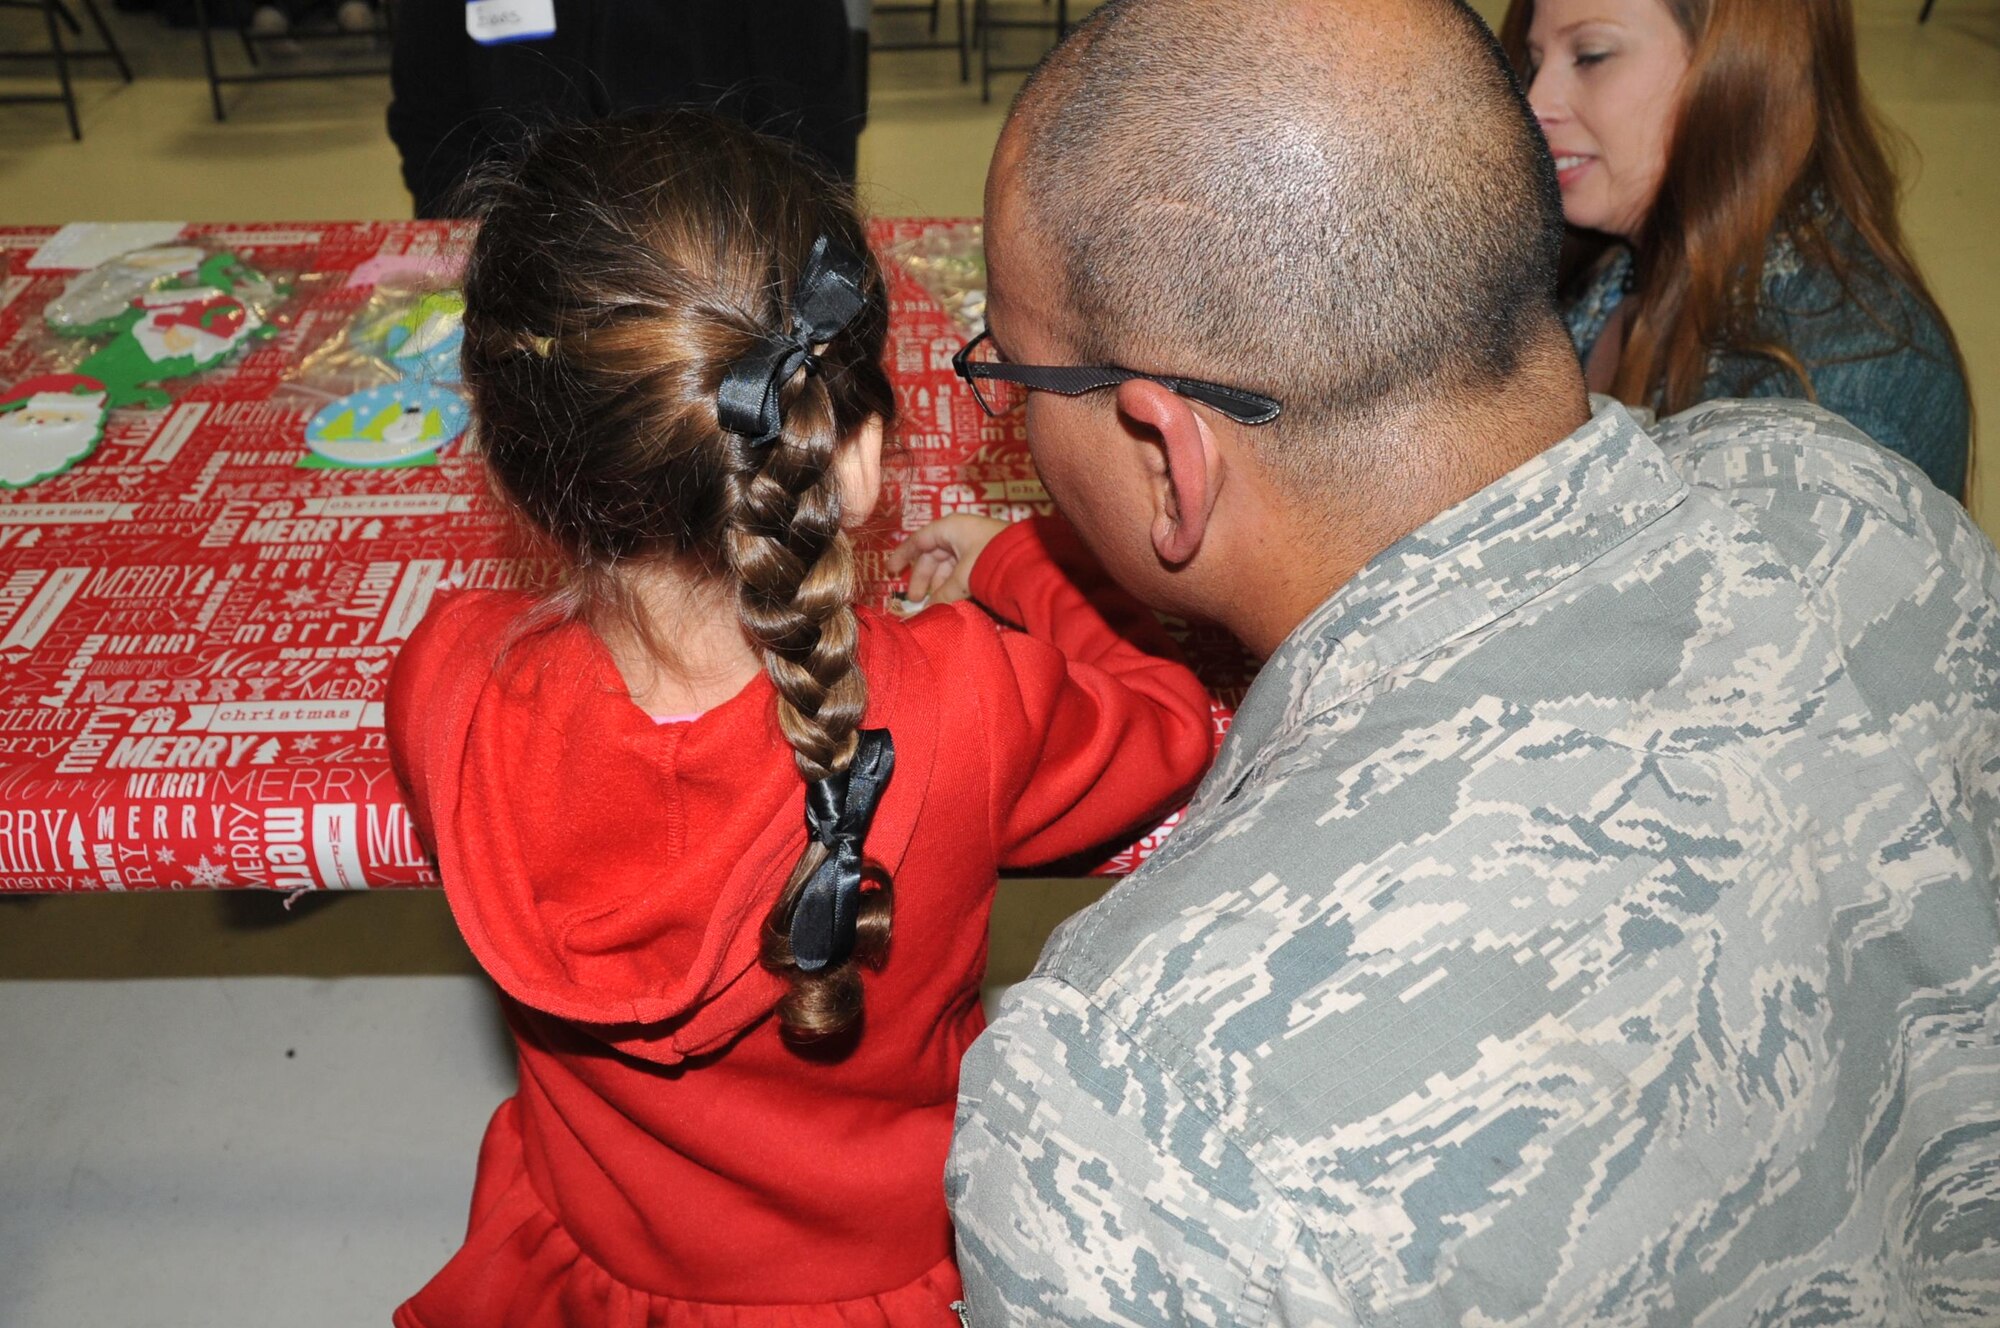 Members of the 403rd Wing and their families visit with Santa during the 403rd Wing children's holiday party Dec. 3, 2016.  (U.S. Air Force photo/Master Sgt. Jessica Kendziorek)